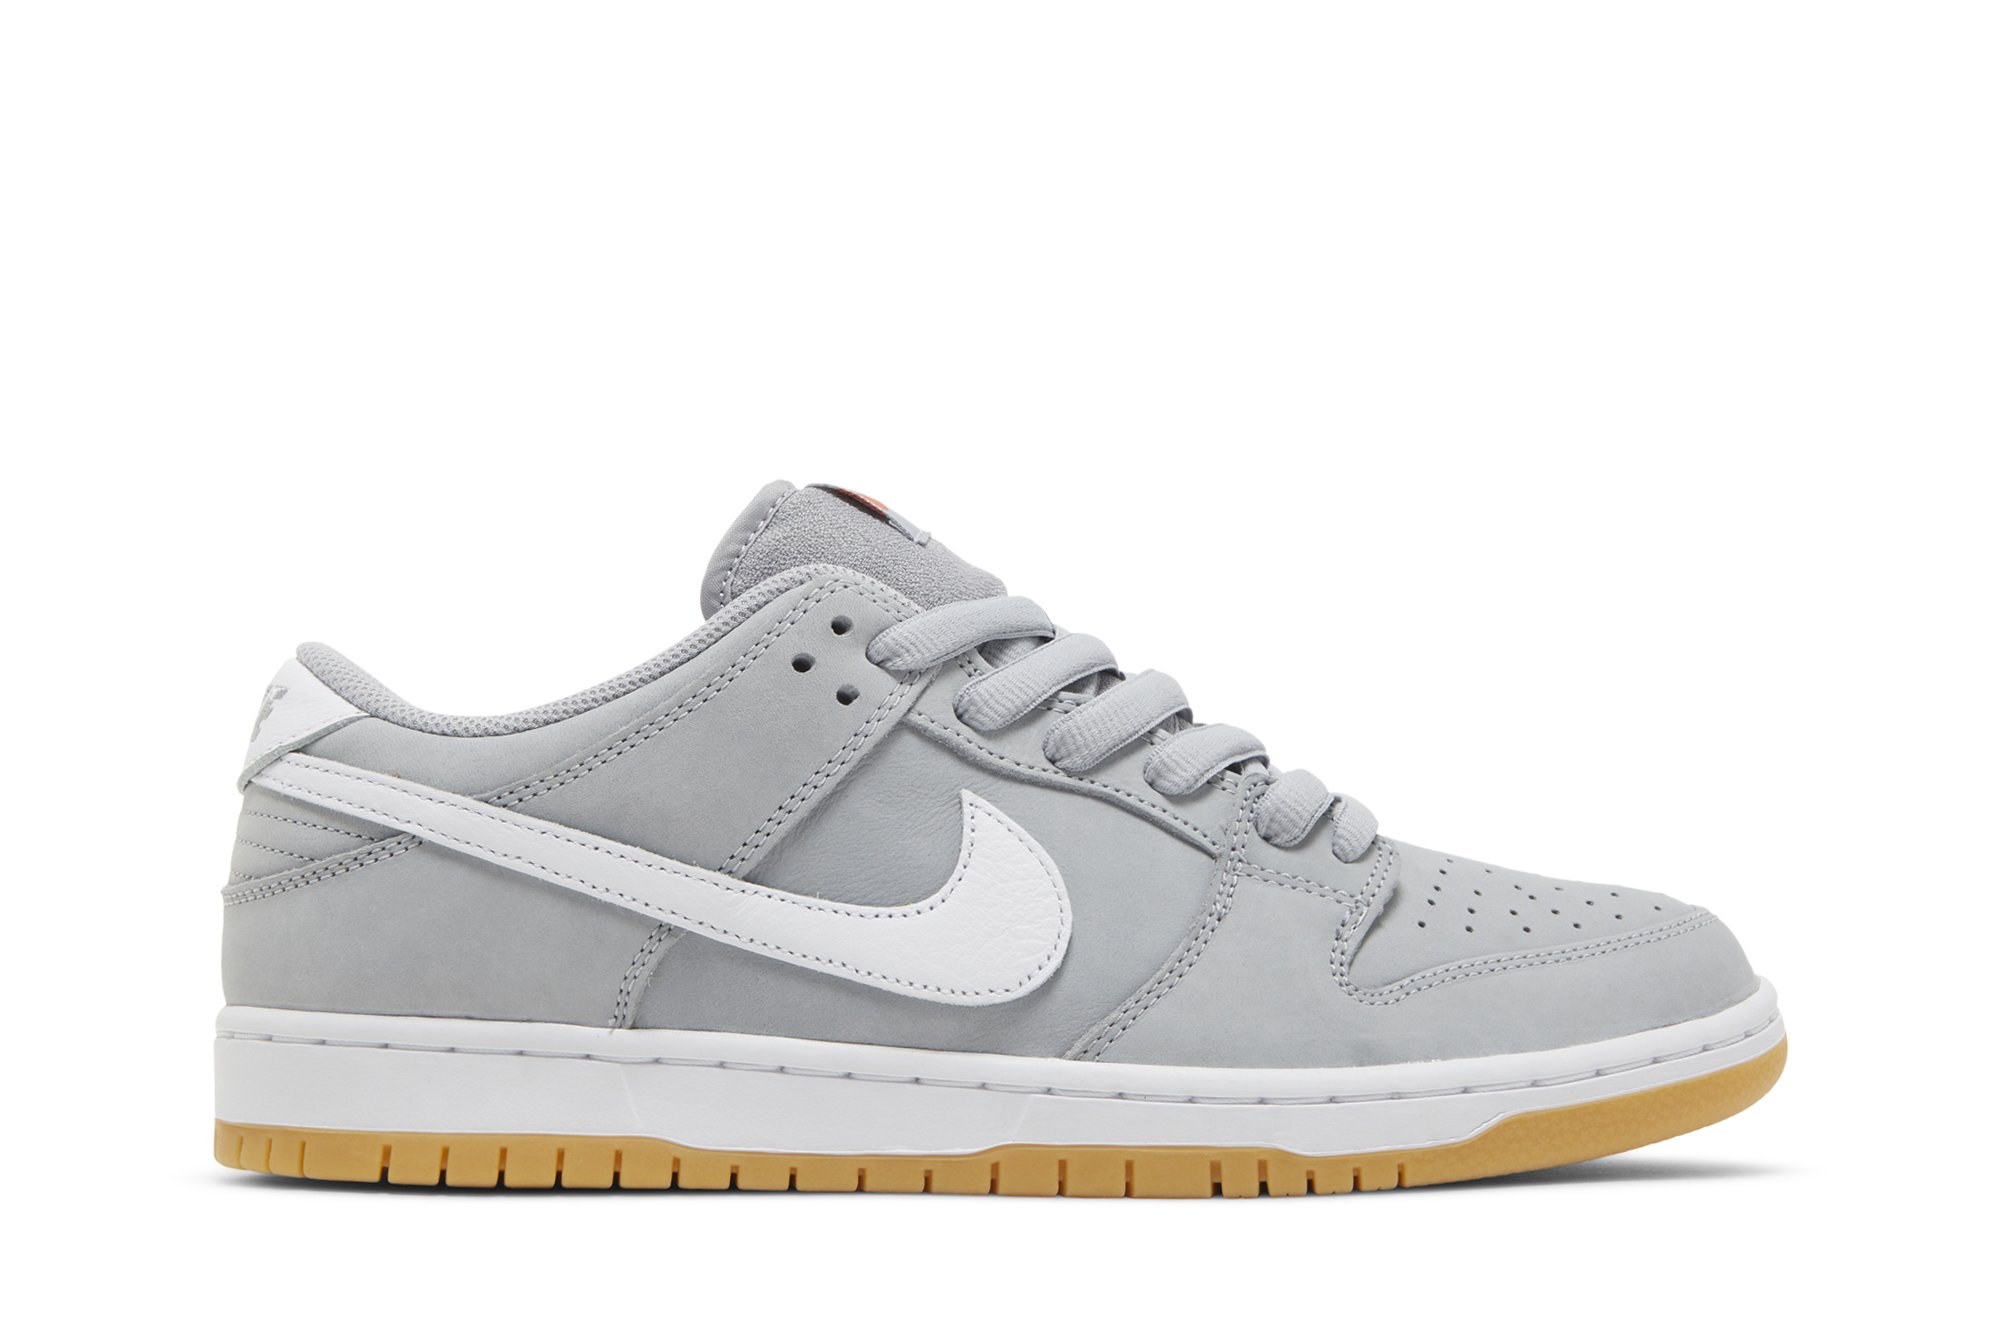 NIKE SB DUNK LOW PRO ISO WOLF GRAY